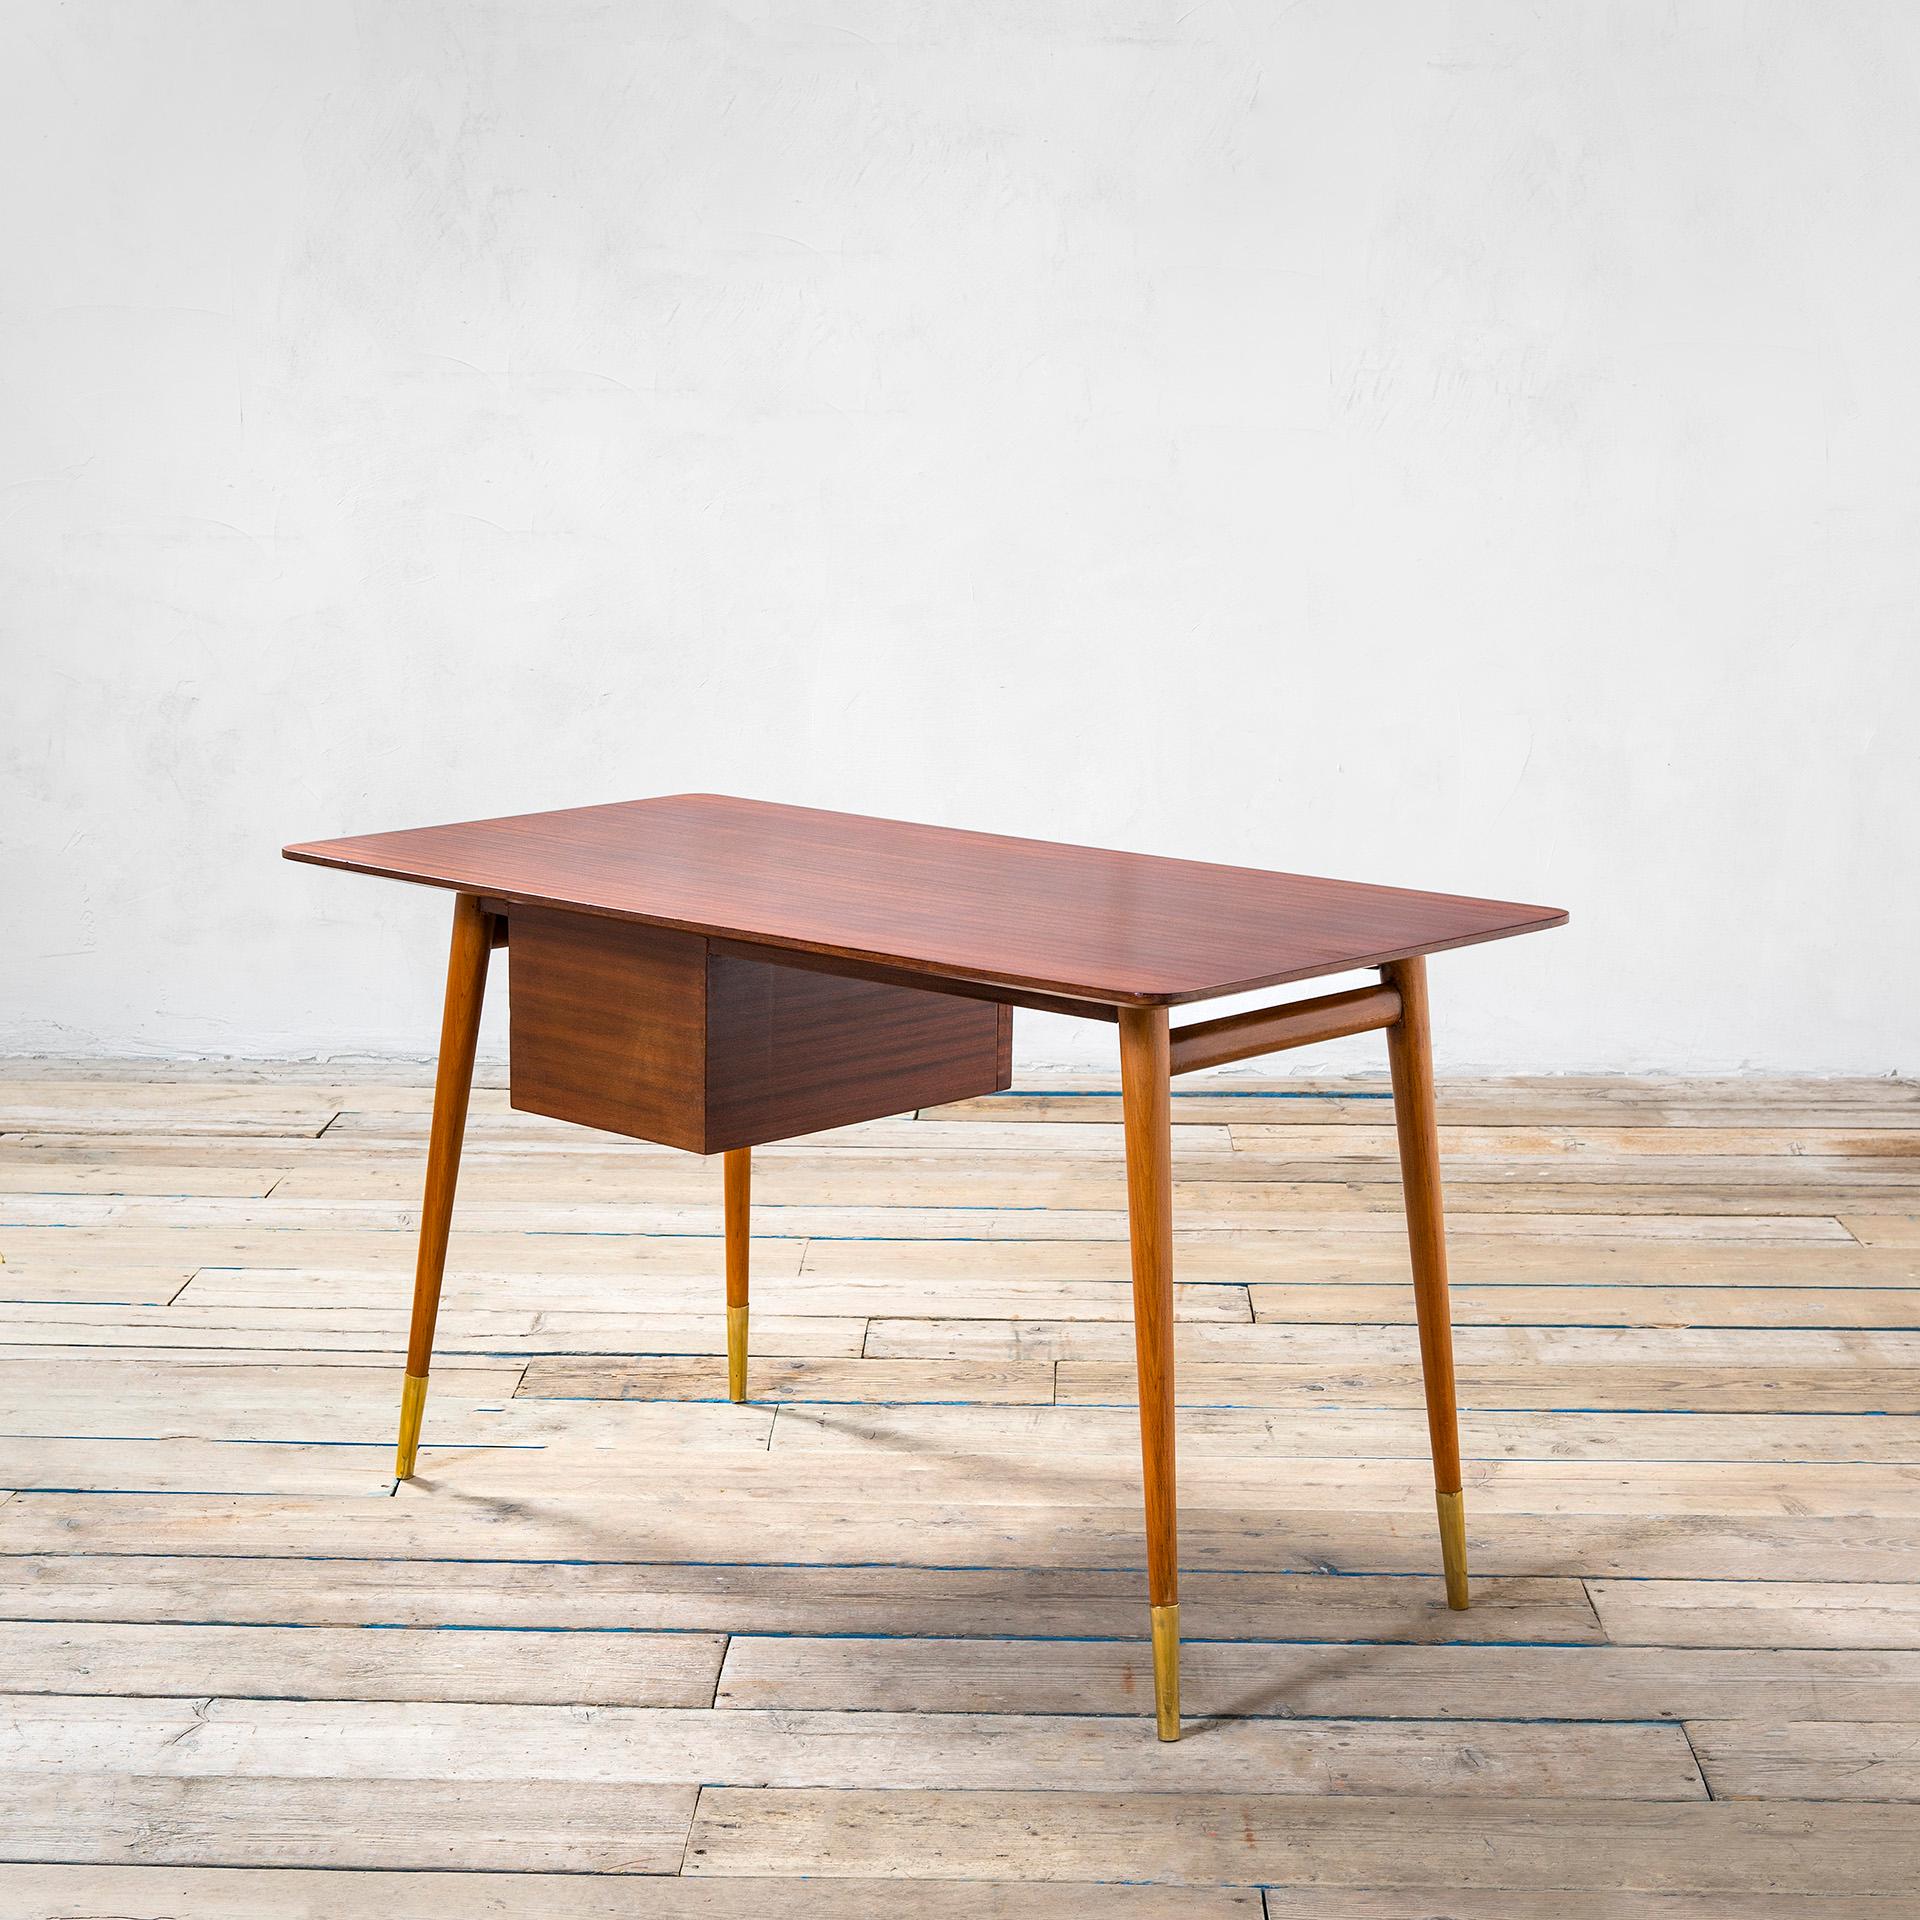 20th Century Melchiorre Bega Desk with wooden structure, drawers Brass details For Sale 1